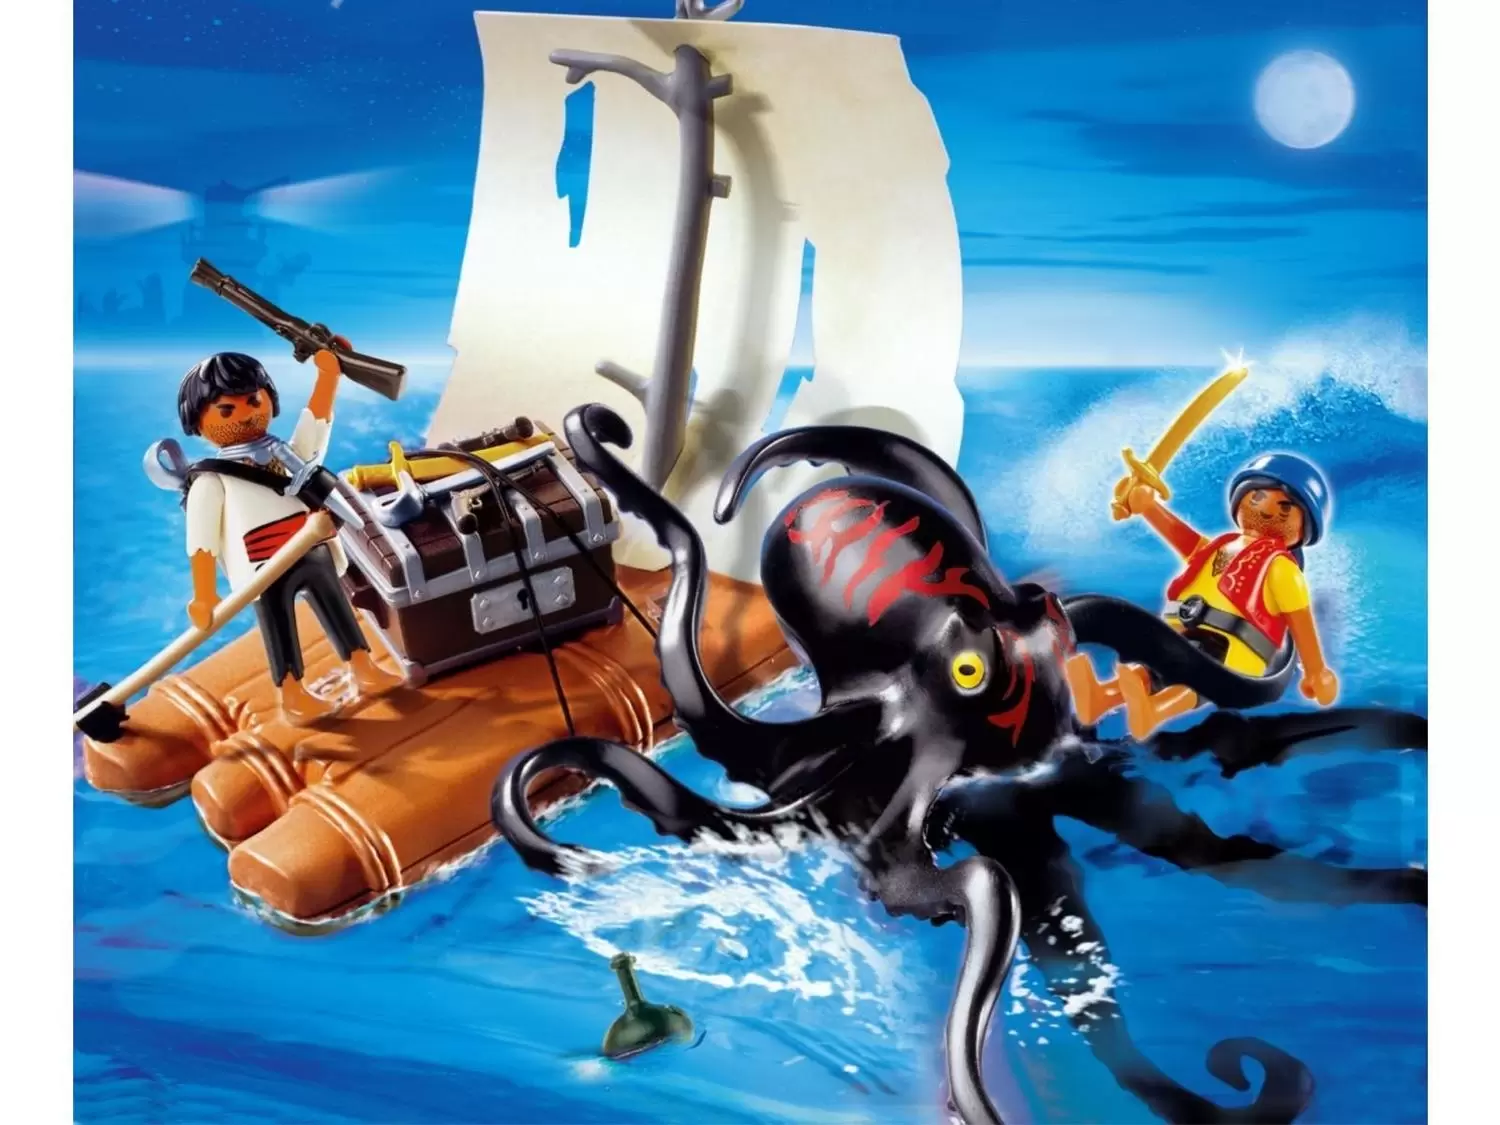 Pirate Playmobil - Raft with giant octopus